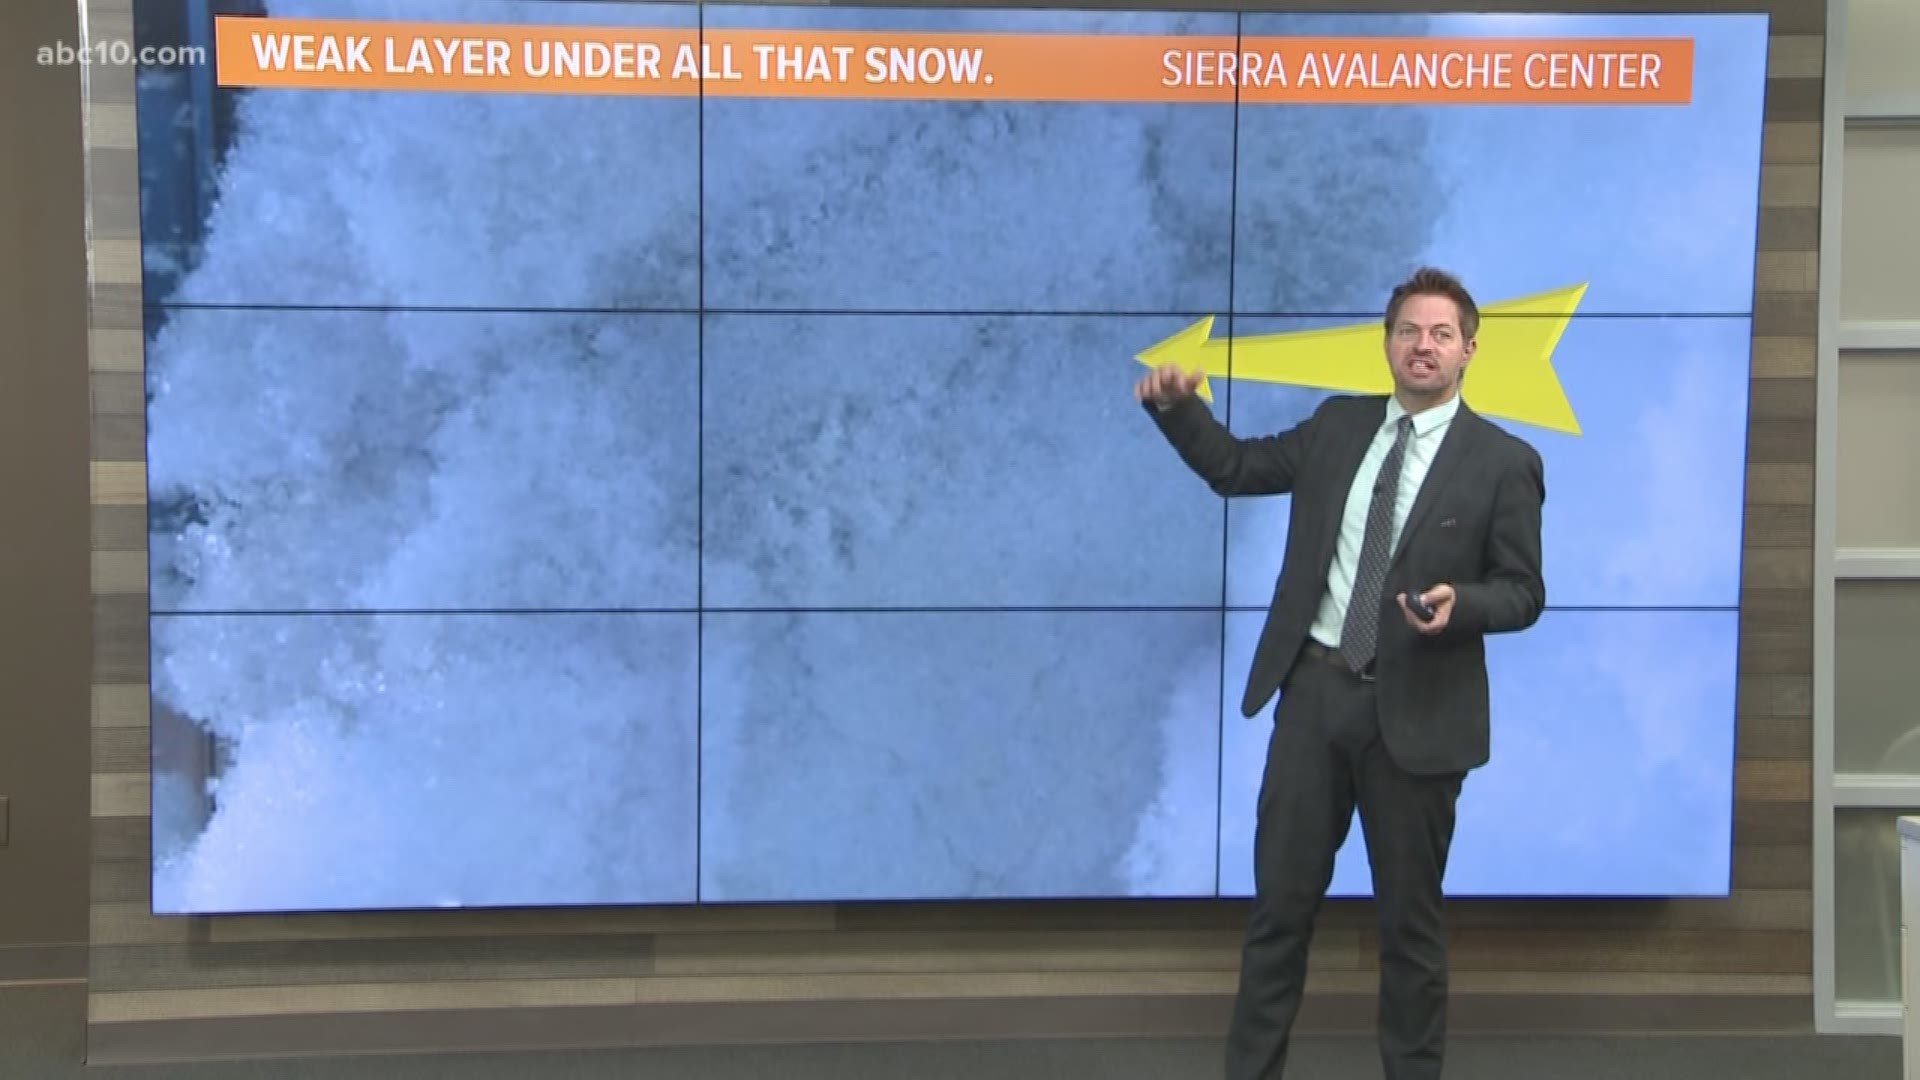 You might not expect avalanche danger early in the season in the Sierra mountains, but Rob Carlmark explains what happened in one recent avalanche.